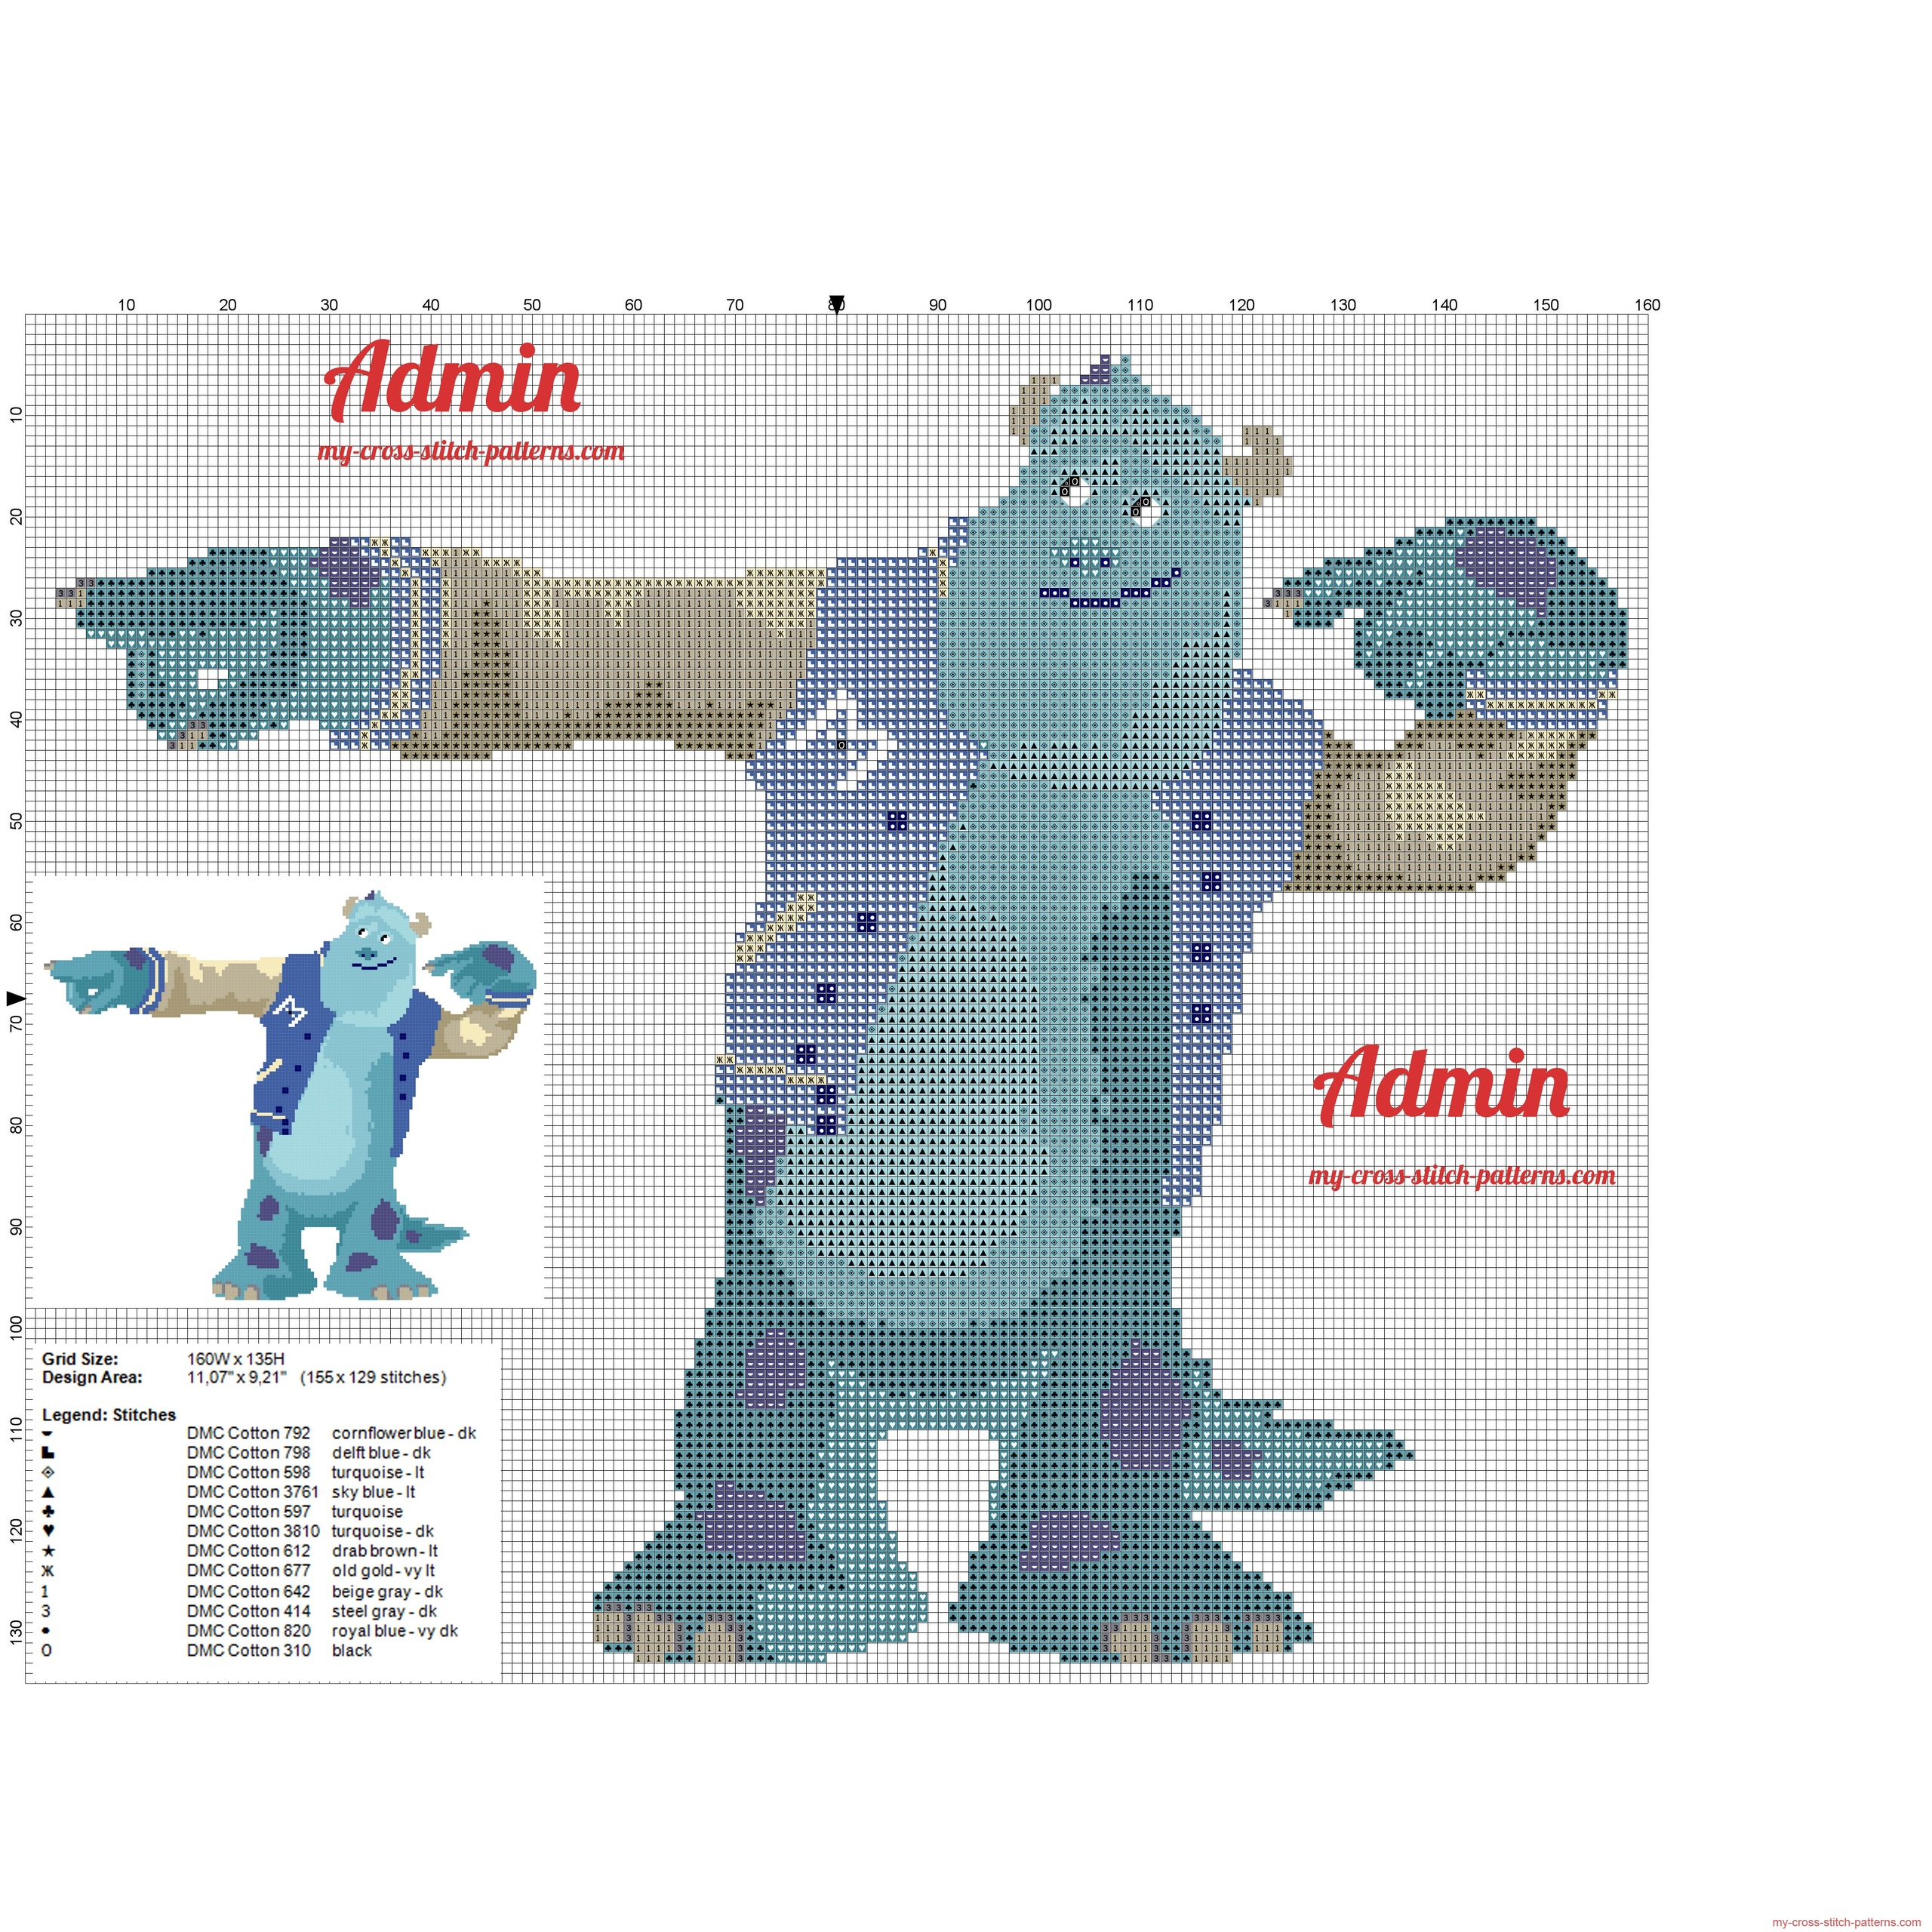 sulley_character_of_monsters_university_cross_stitch_pattern